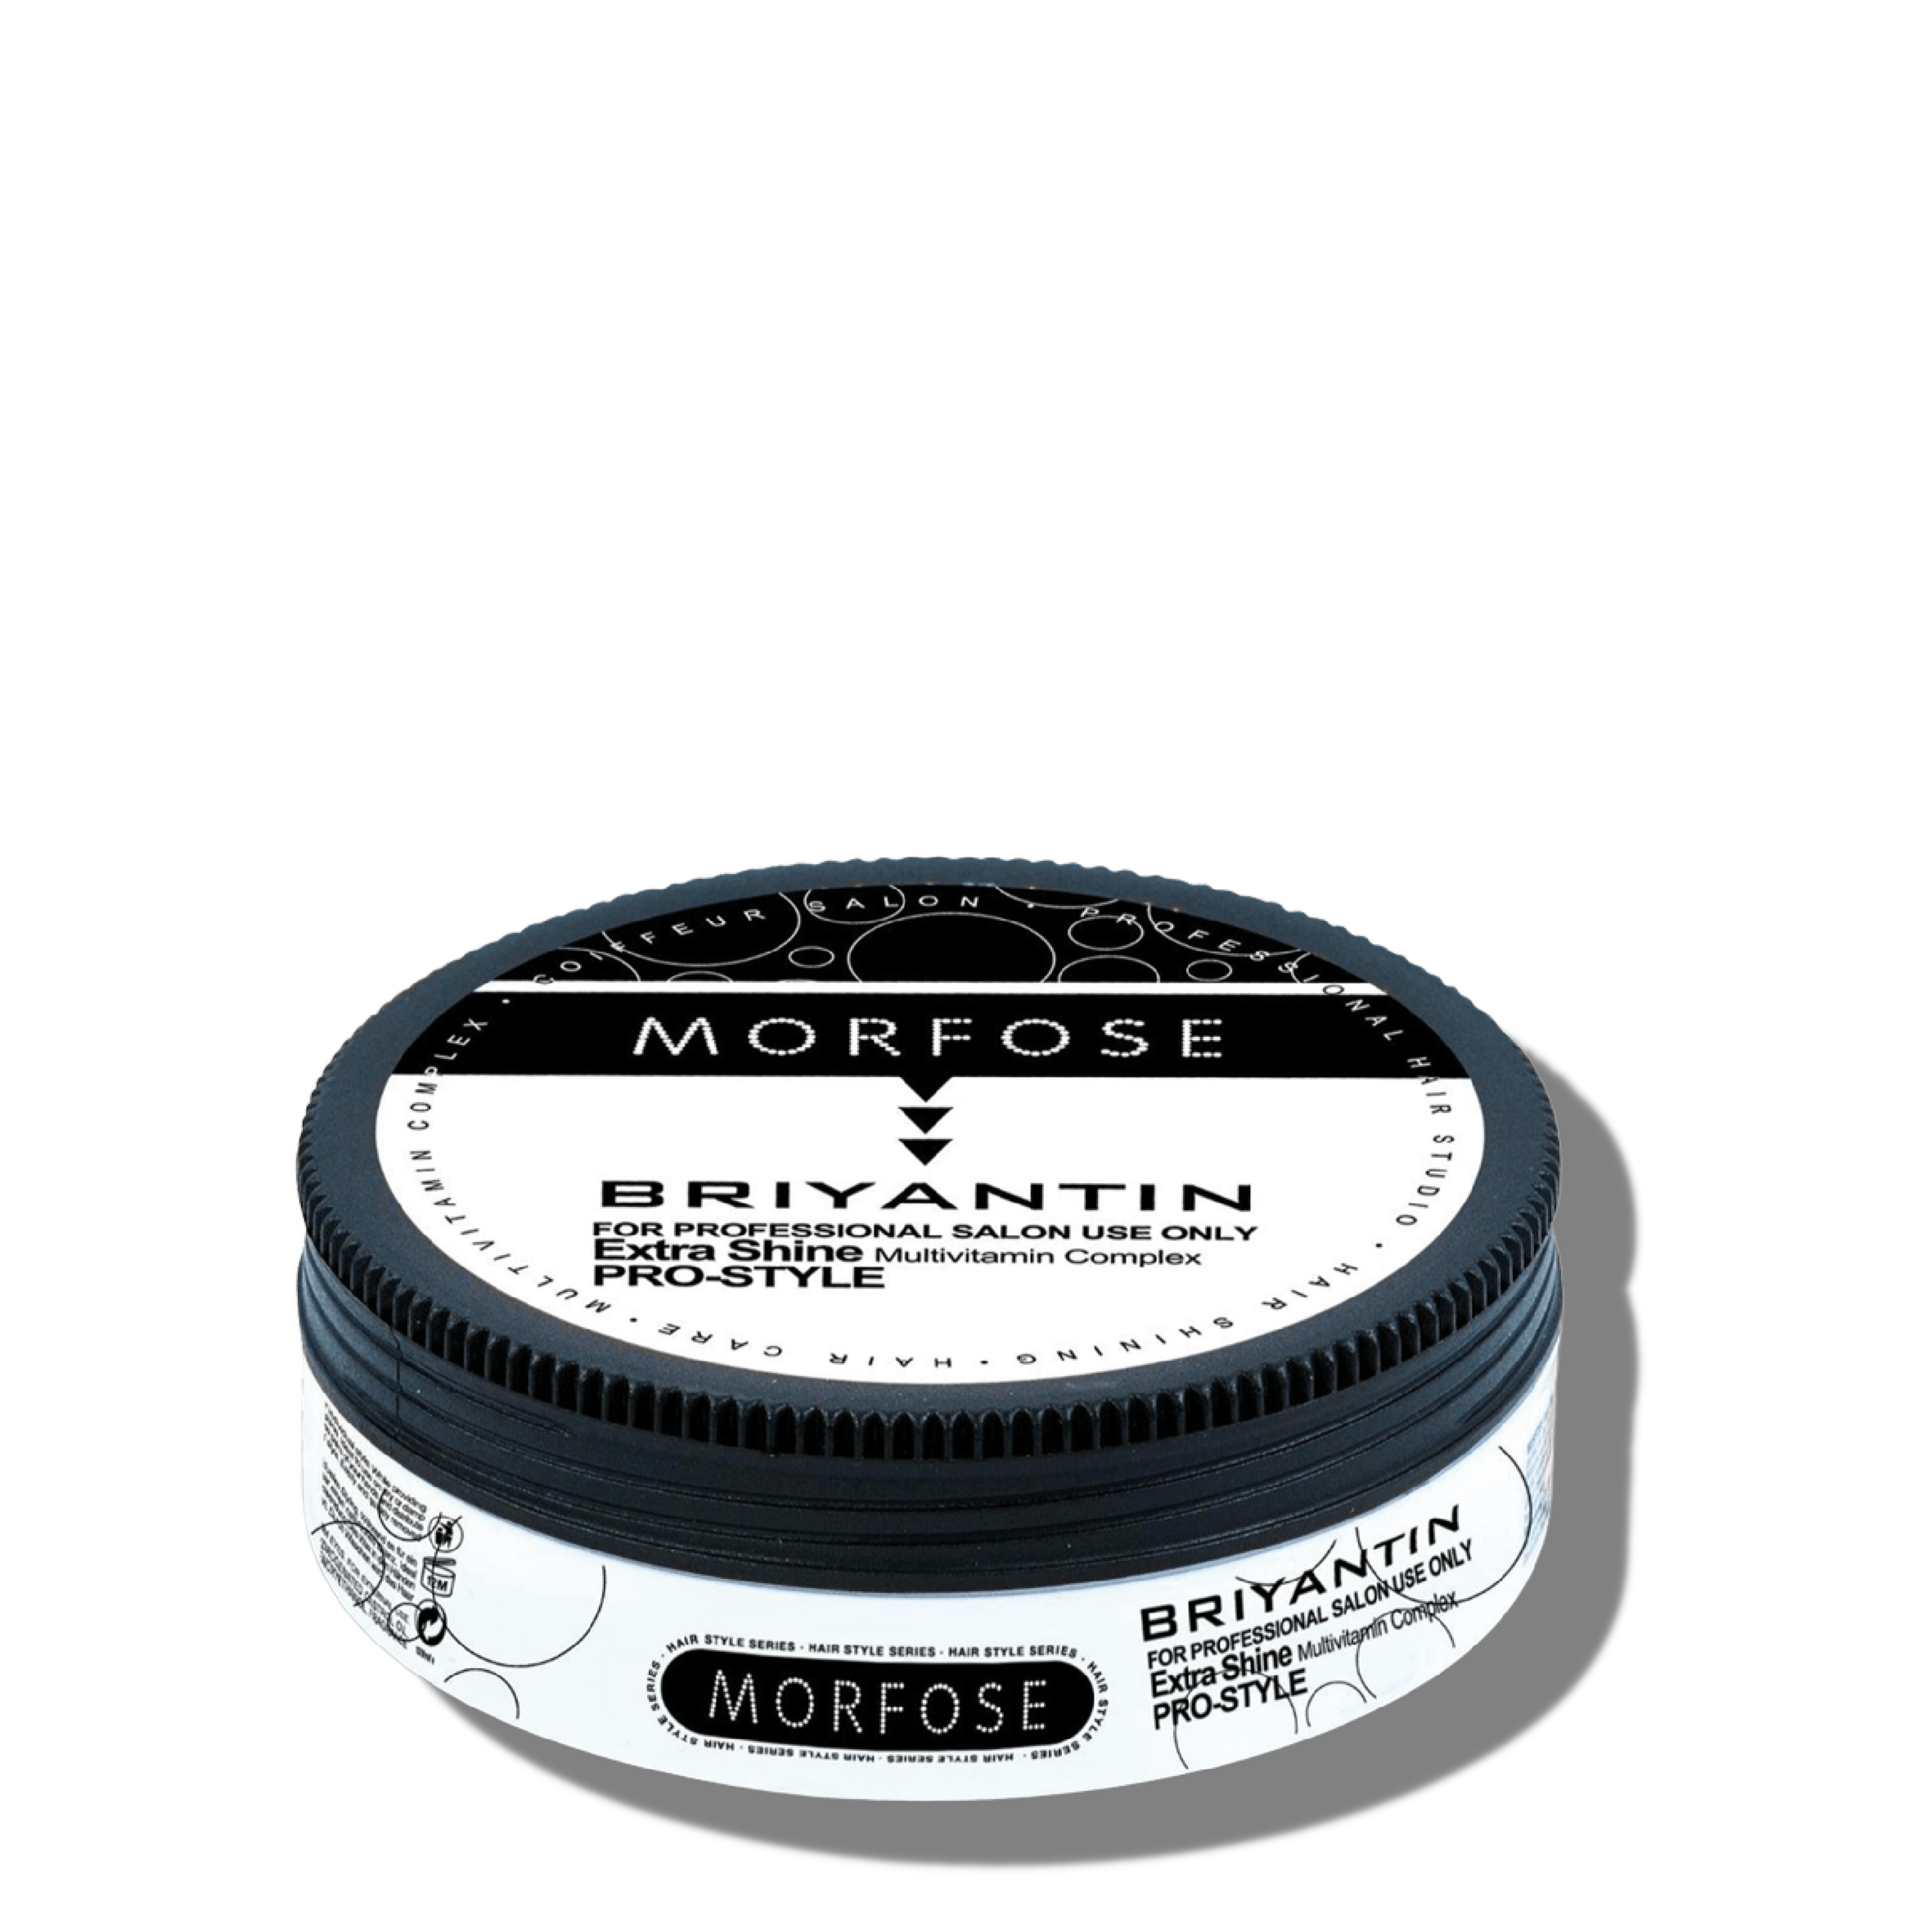 Morfose Professional Briyantin Hair Wax for Defined and Textured